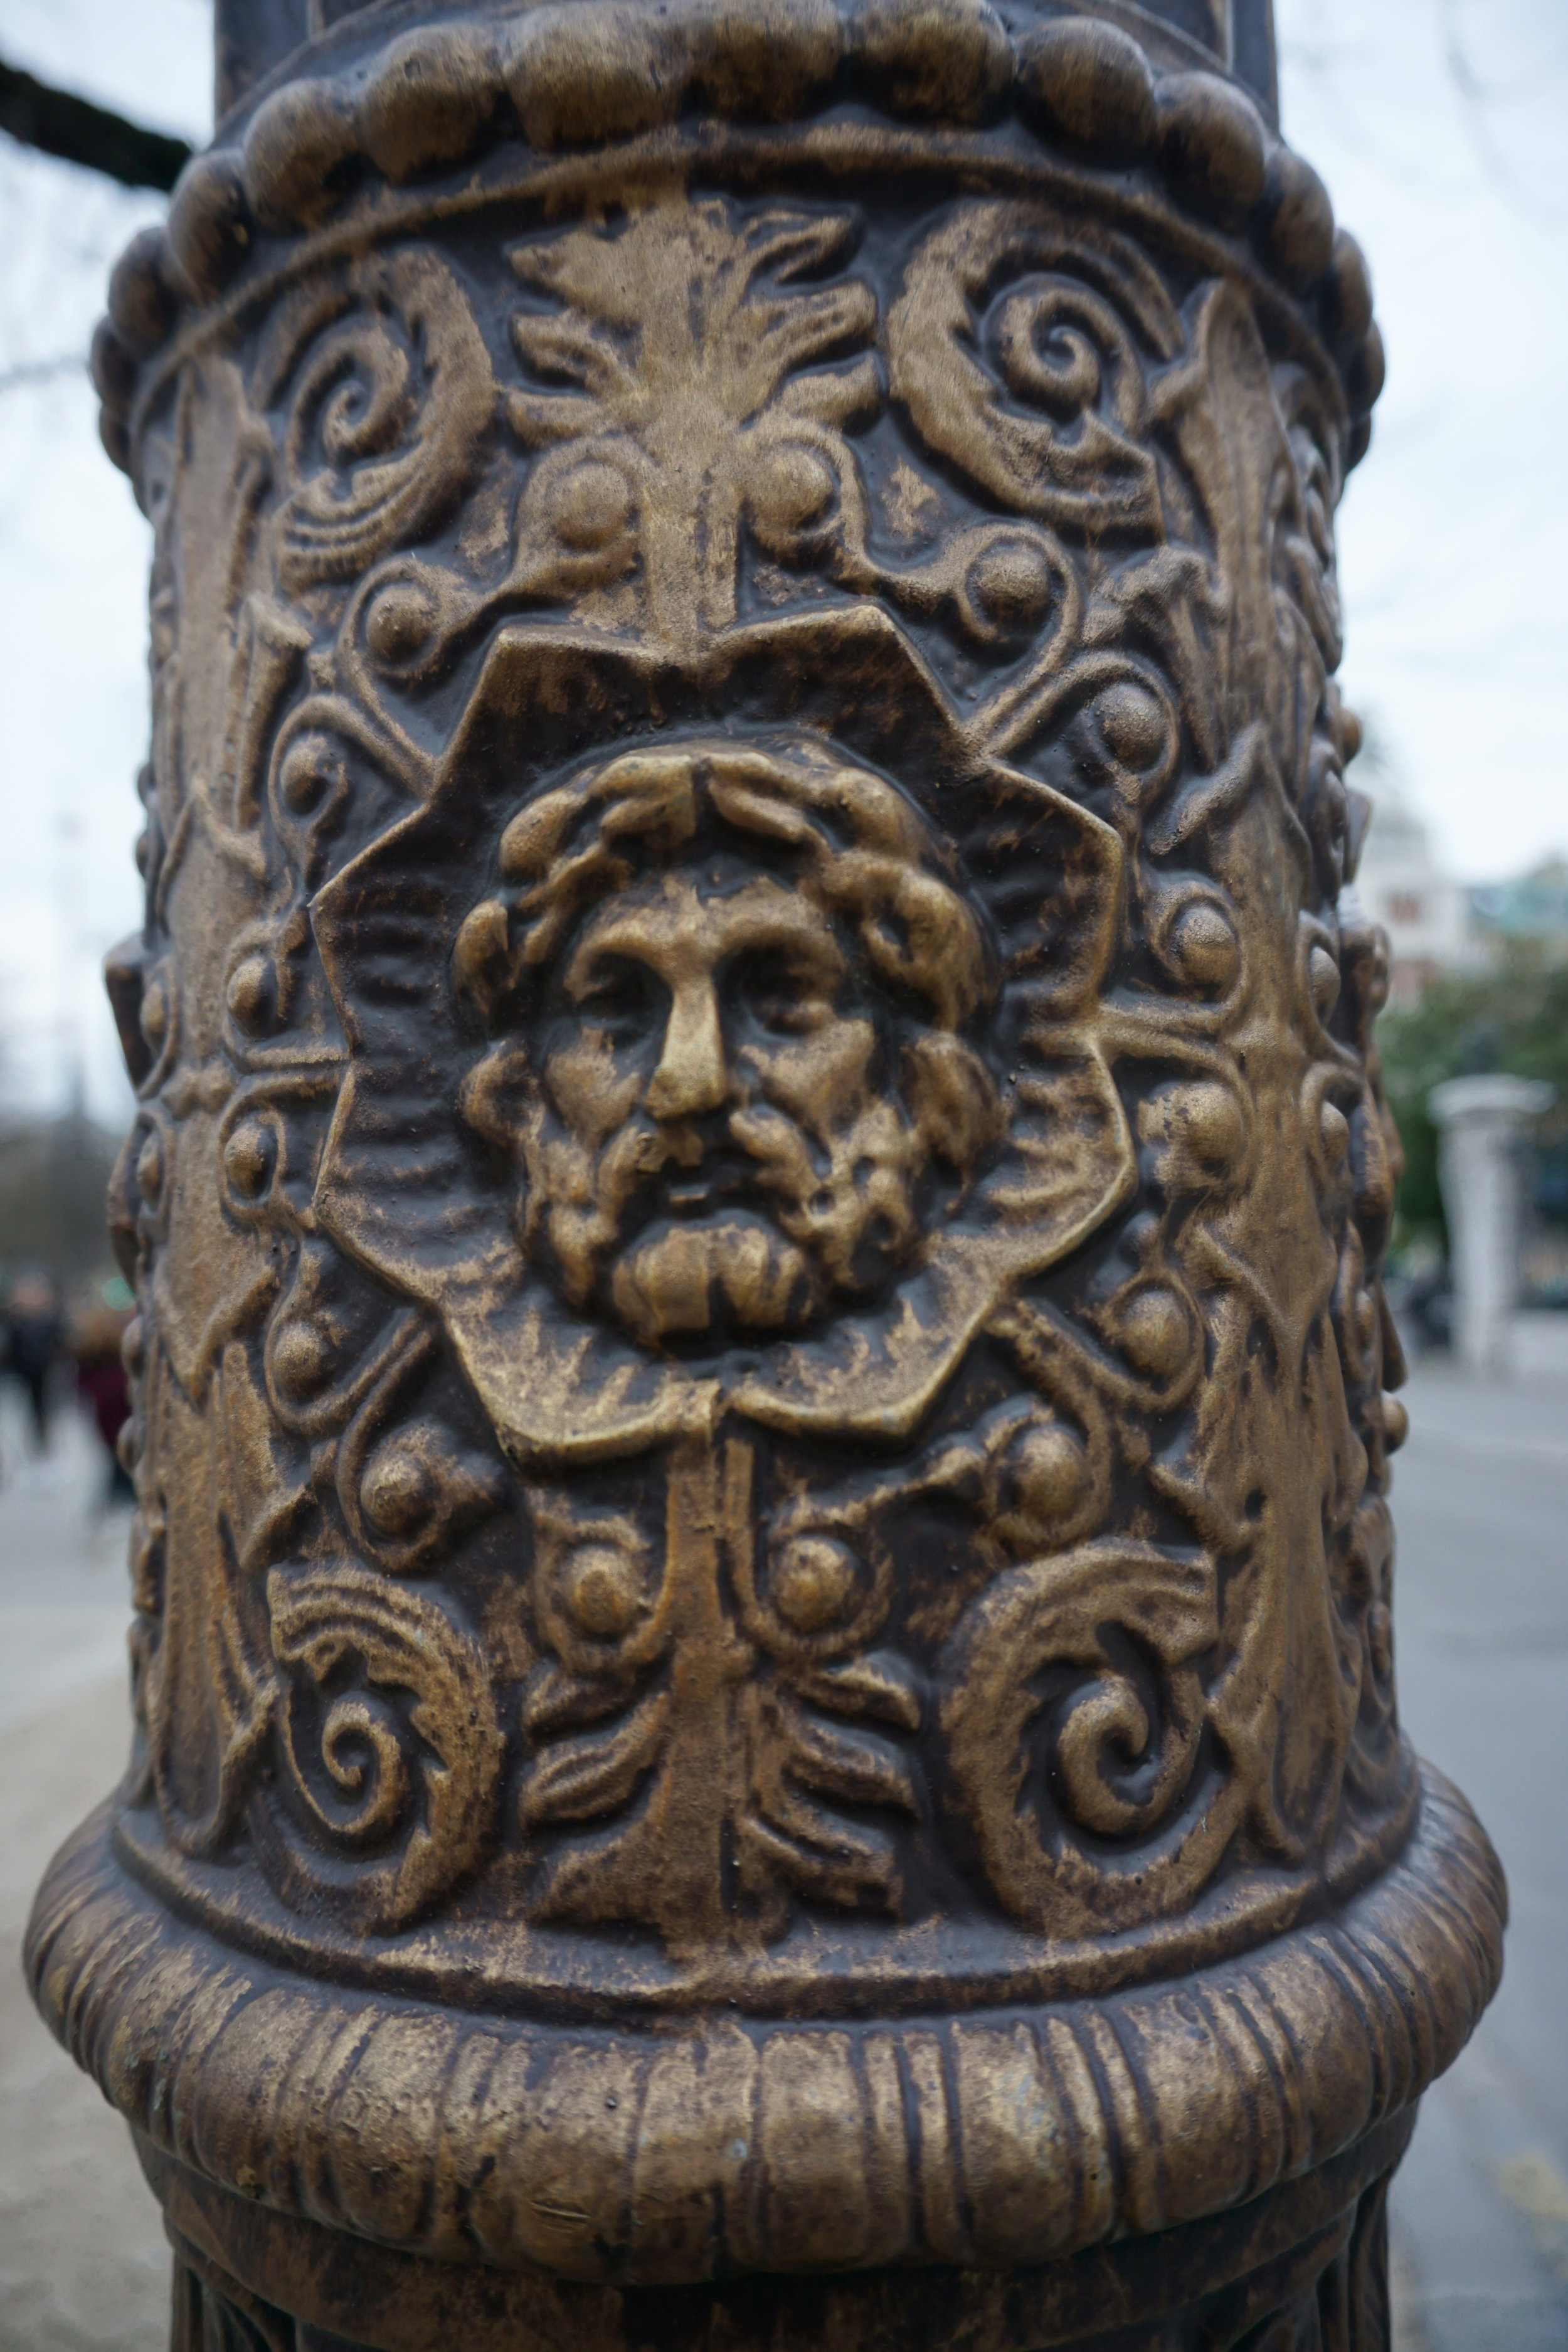  Even the lamp posts are works of art 